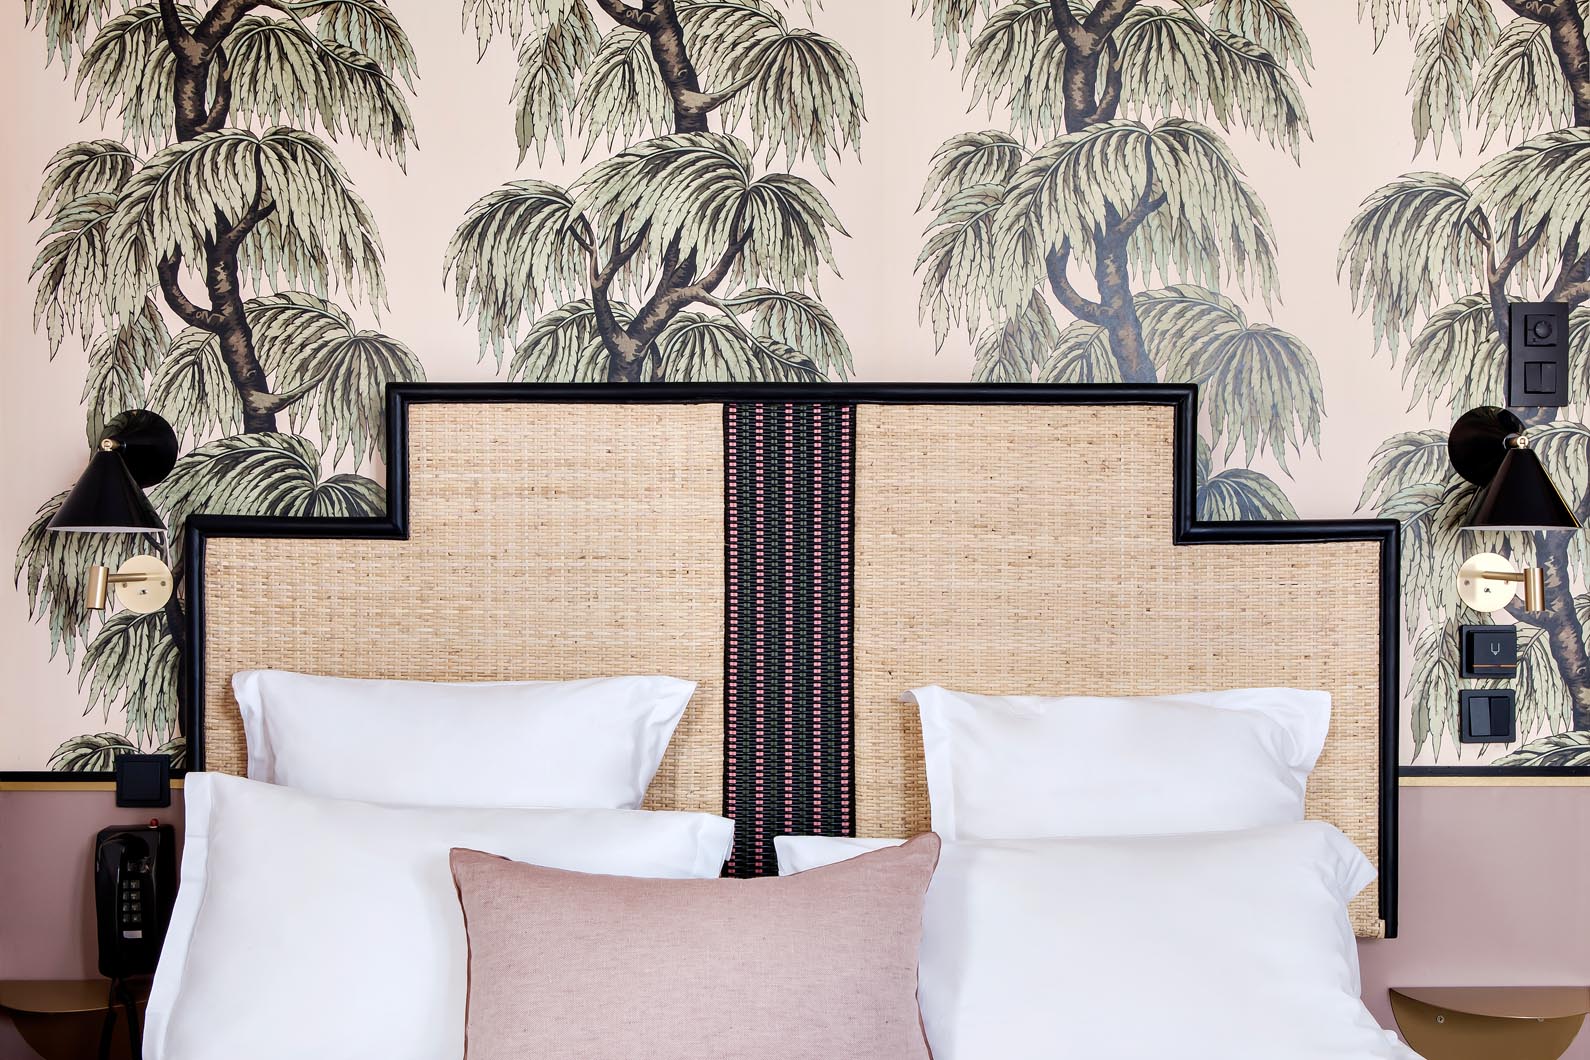 hotel doisy etoile in paris | statement headboards from our favorite hotels are inspiring bedroom decor | coco kelley